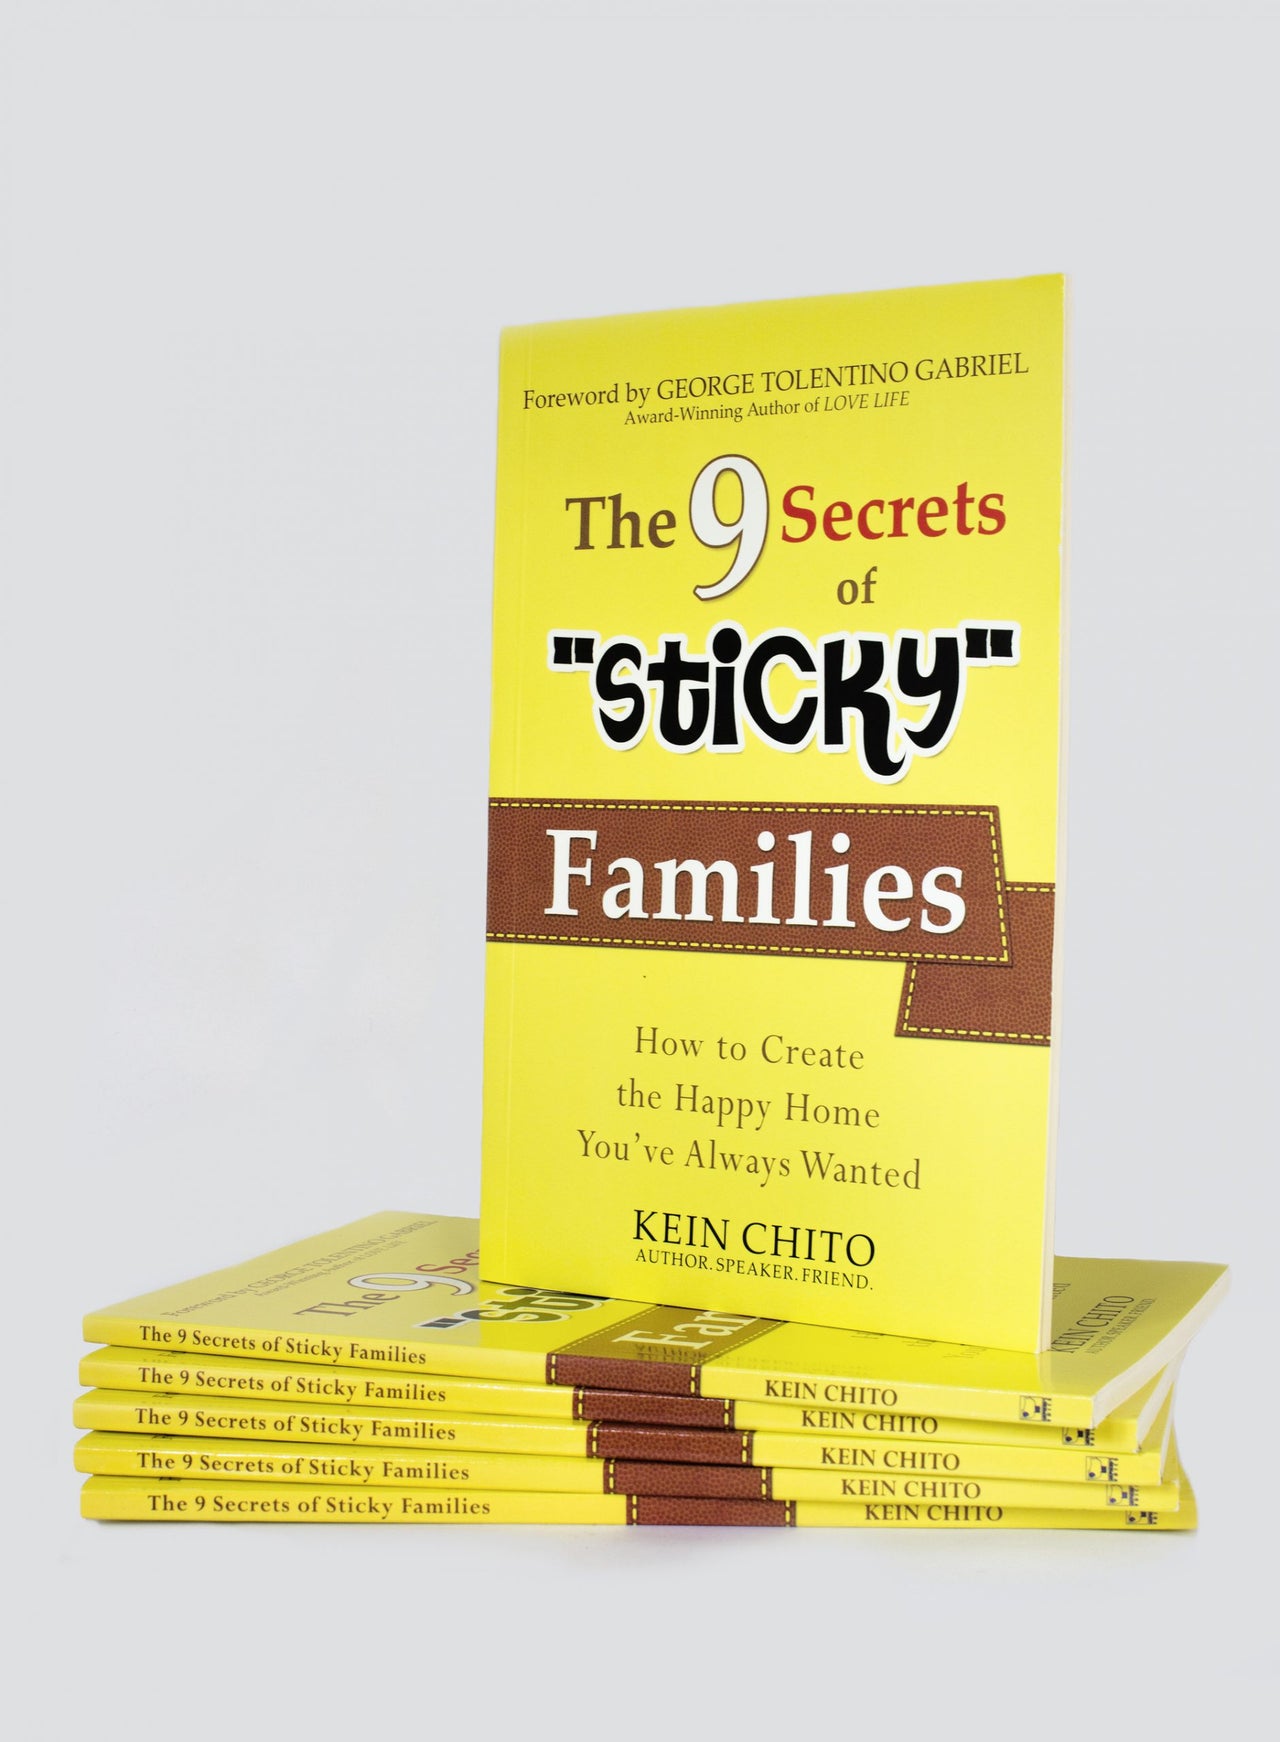 The 9 Secrets of Sticky Families